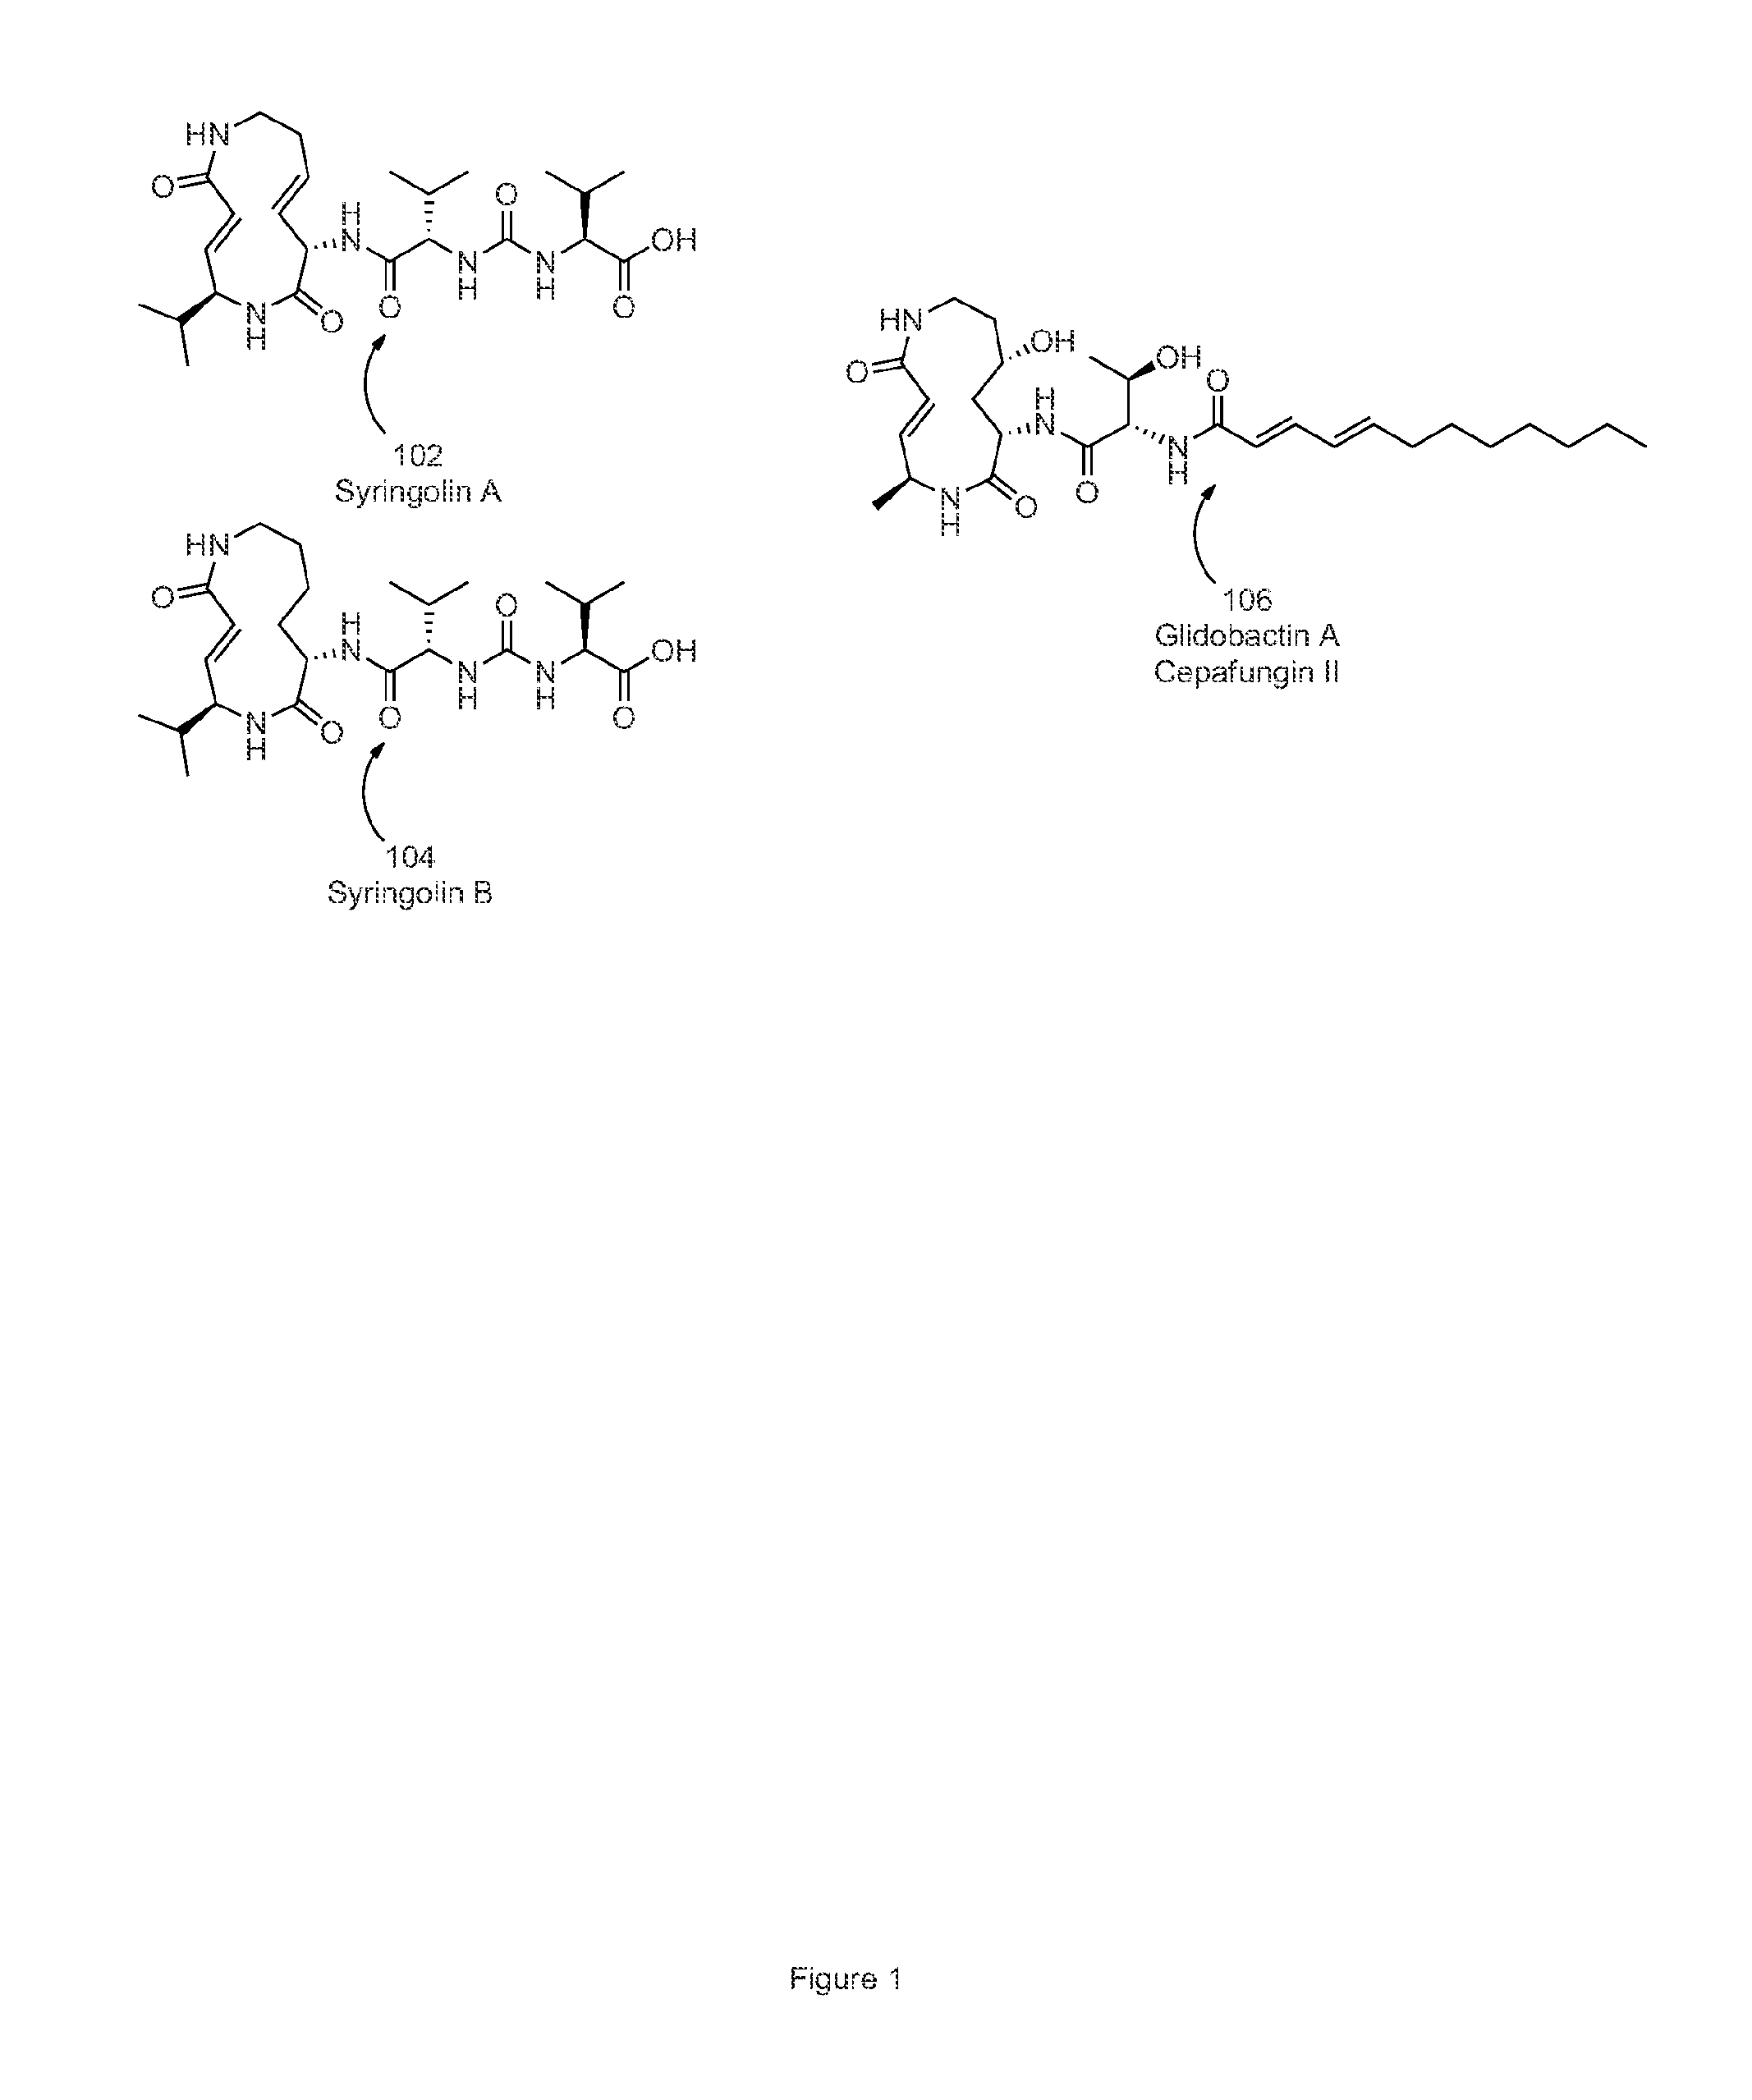 Structures of proteasome inhibitors and methods for synthesizing and use thereof